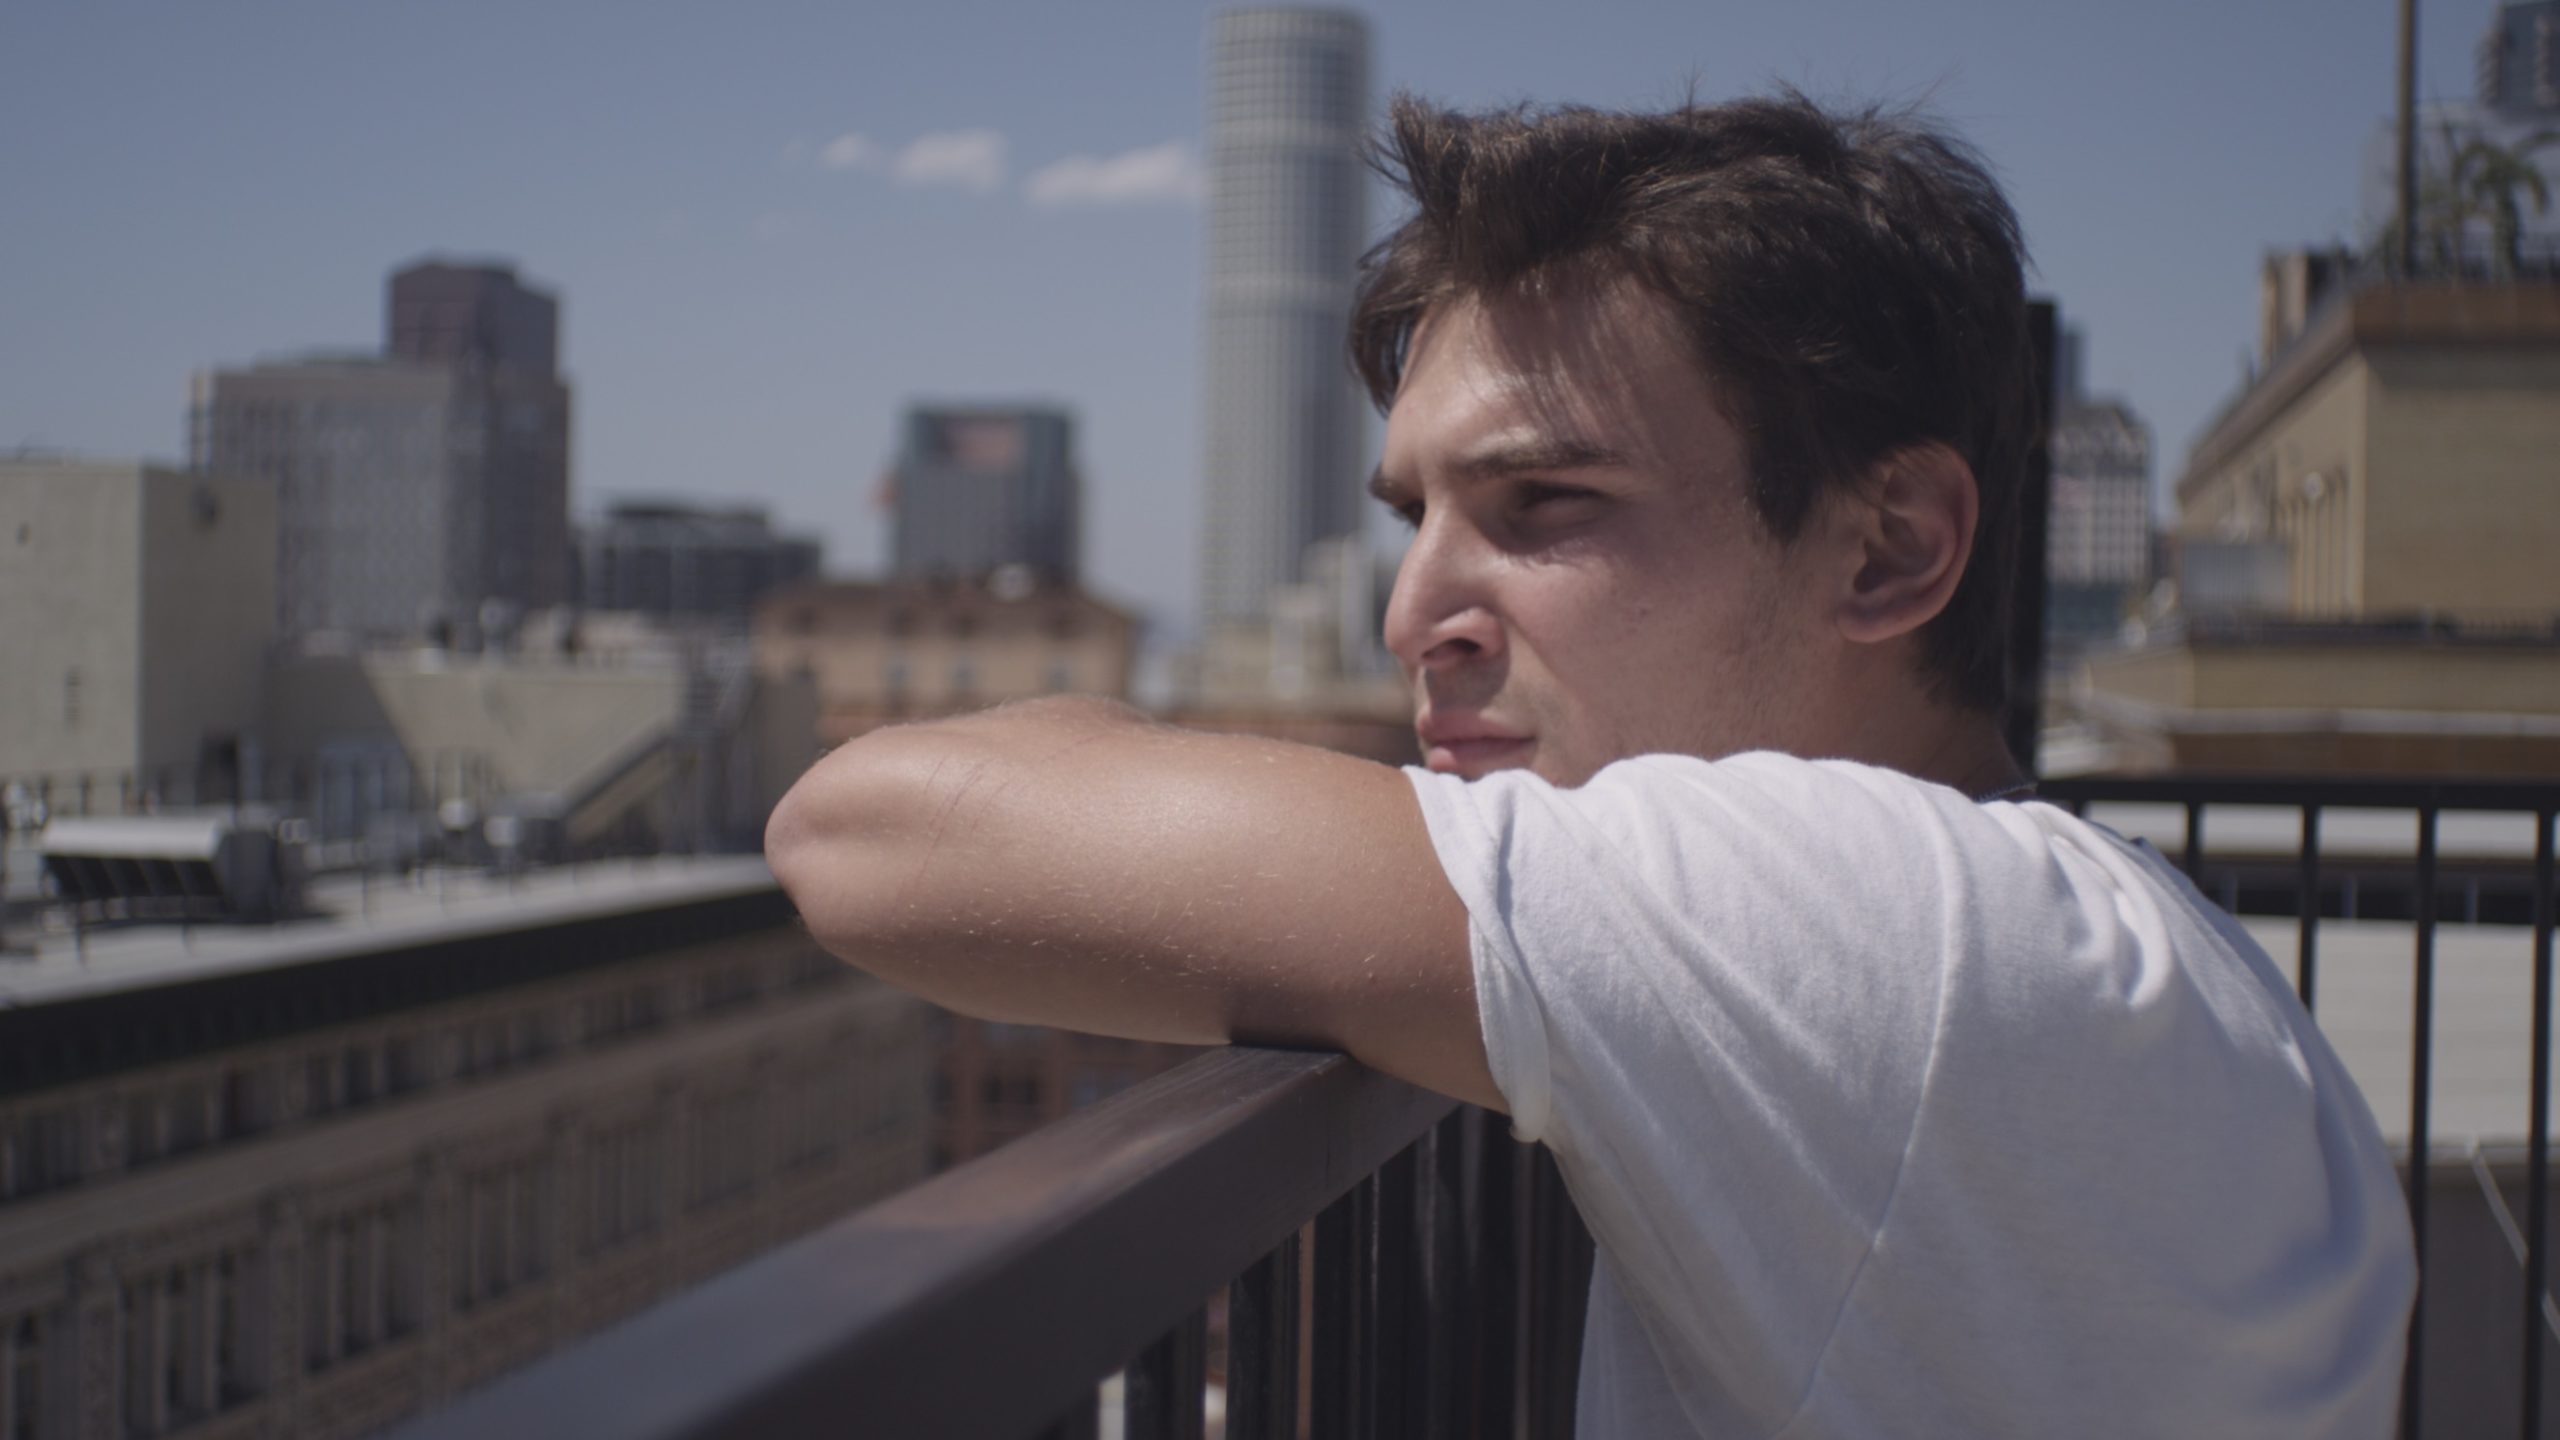 Uncreative Stories Joe Perri Profile headshot of man with short brown hair wearing a white t shirt looking out over a city leaning on a metal railing